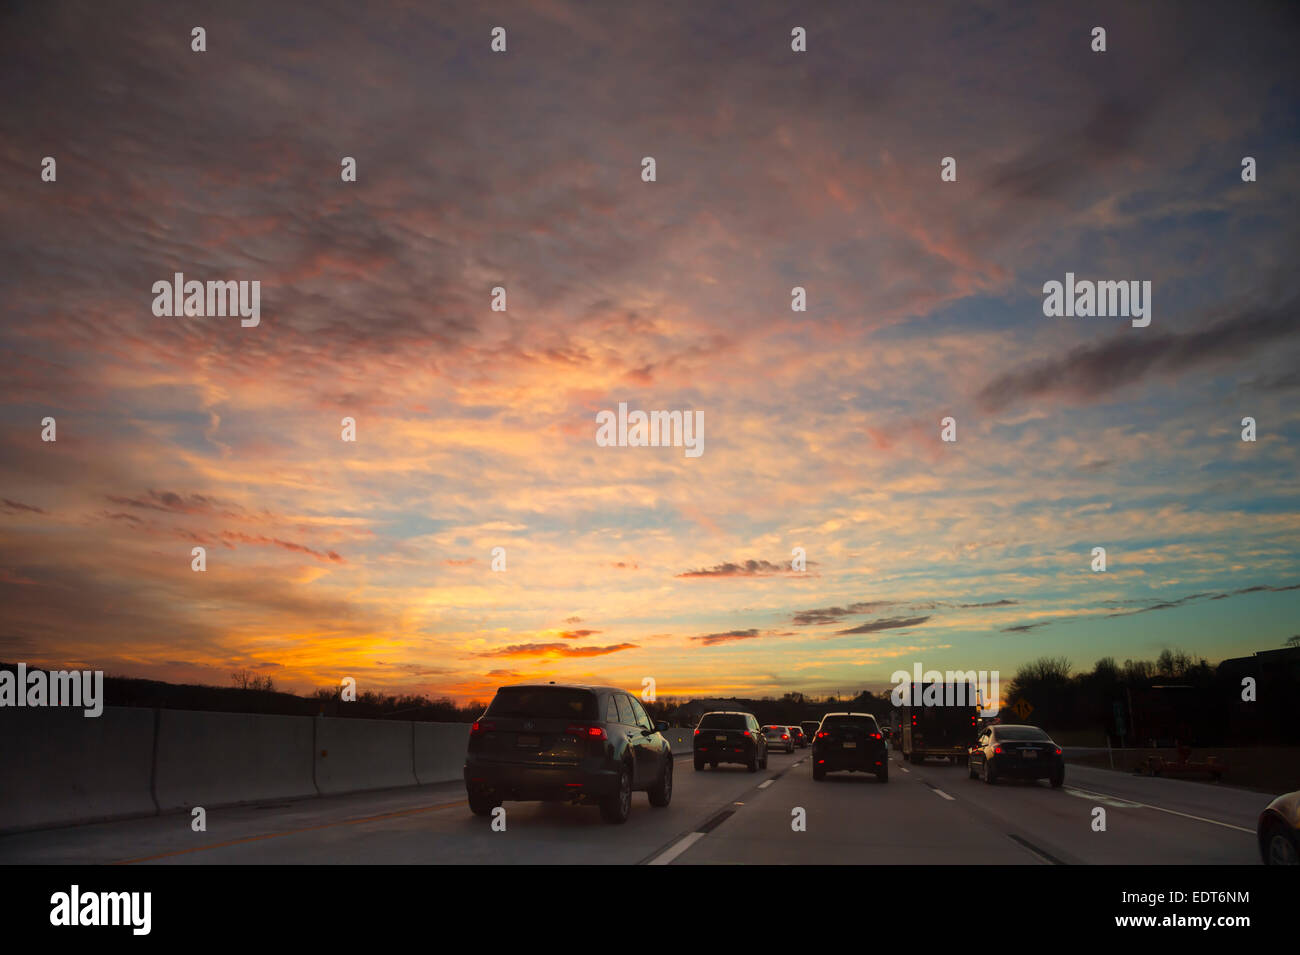 Highway Traffic, Sunset Drivers Perspective Stock Photo